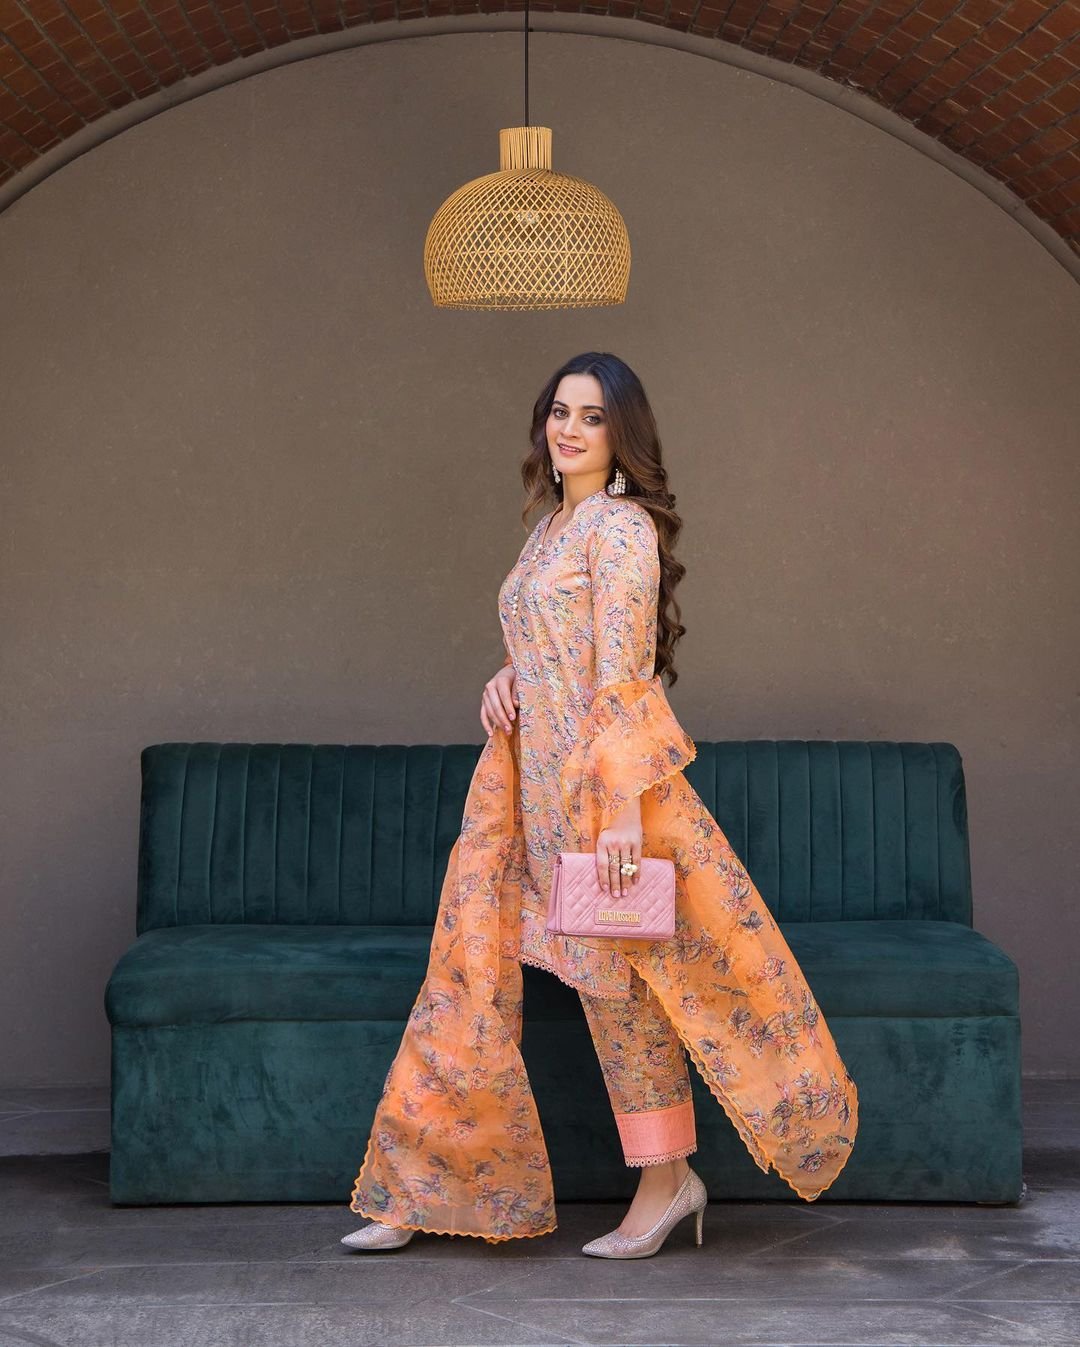 Aiman and Minal Khan usher in blooming spring with stunning floral ensembles